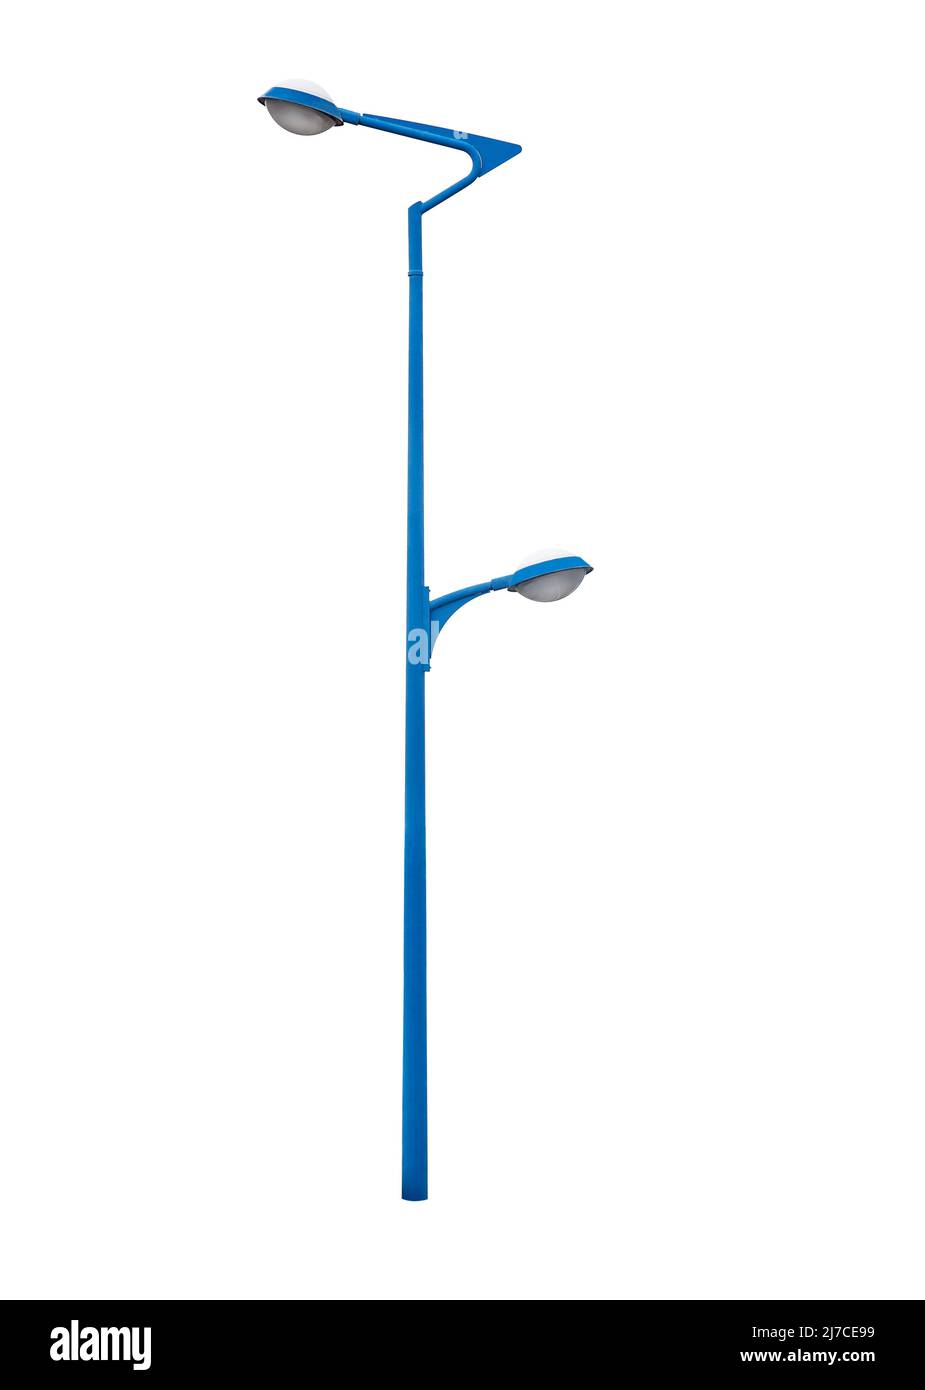 Street lamppost, isolated over white Stock Photo